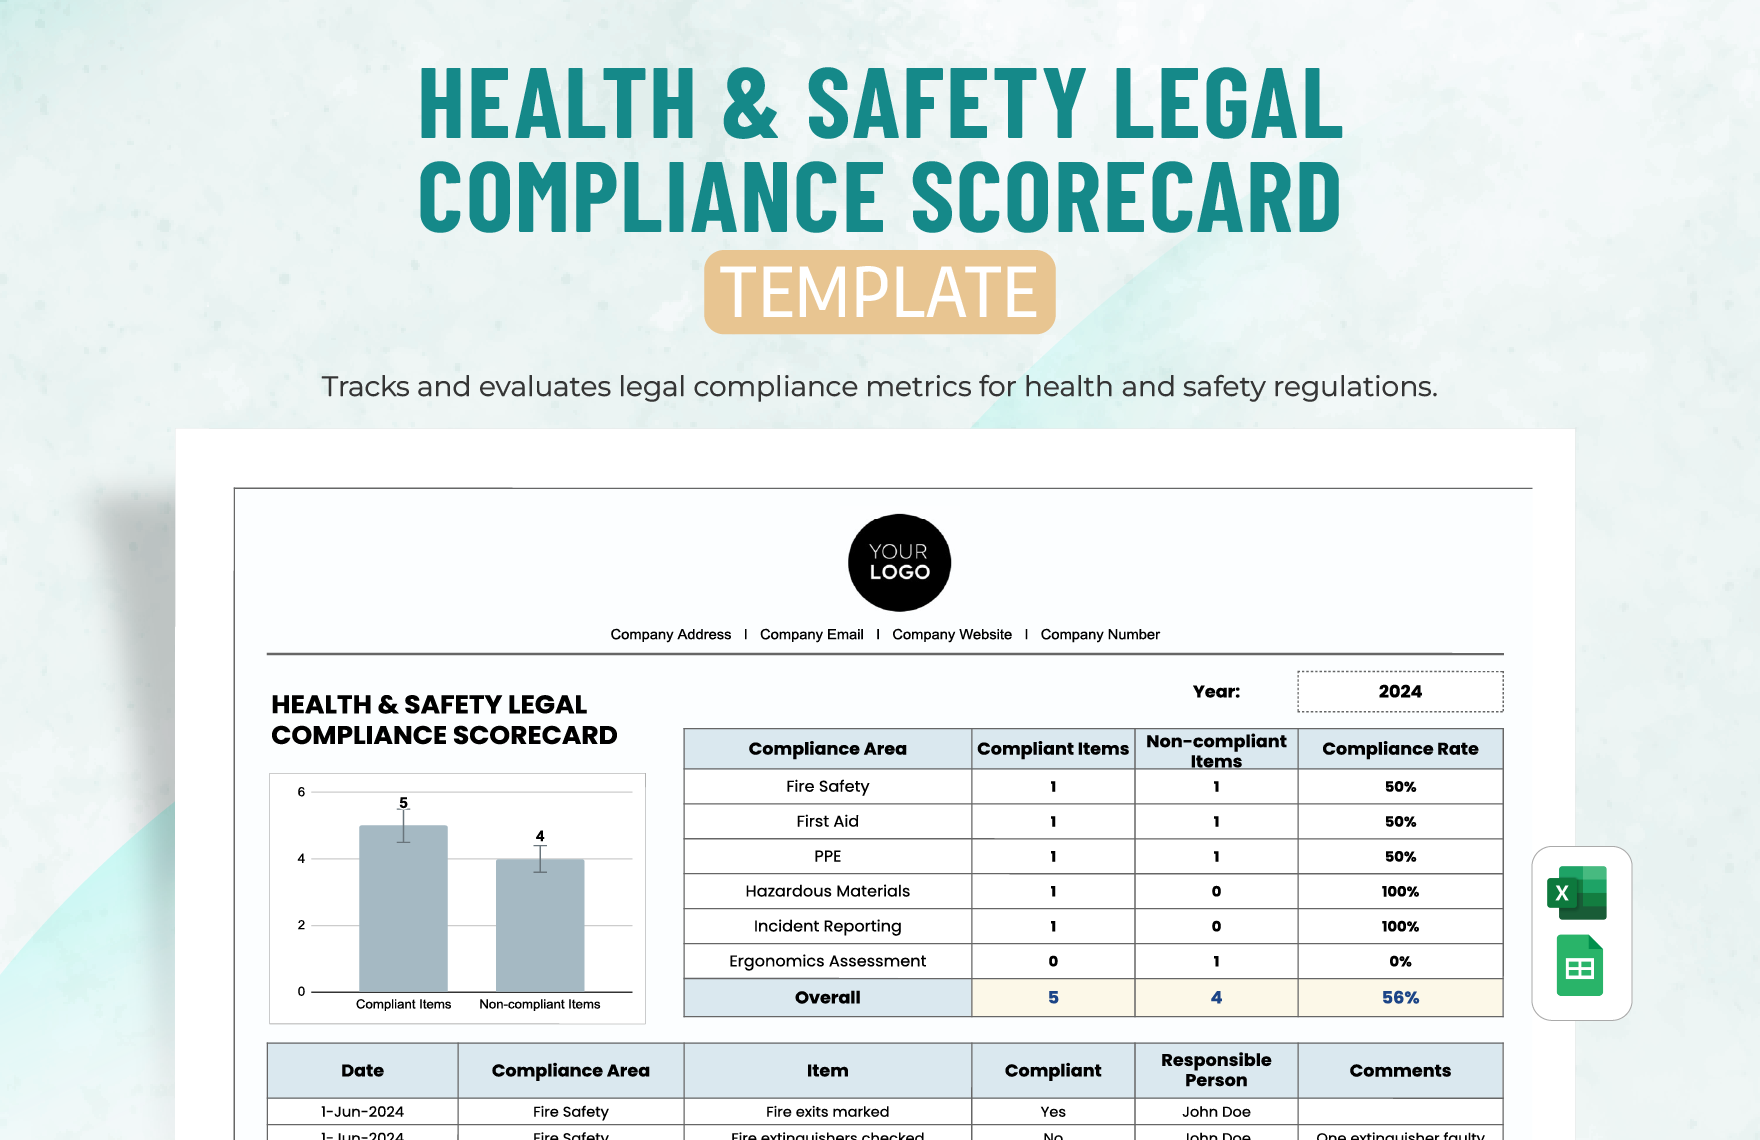 Health & Safety Legal Compliance Scorecard Template in Excel, Google Sheets